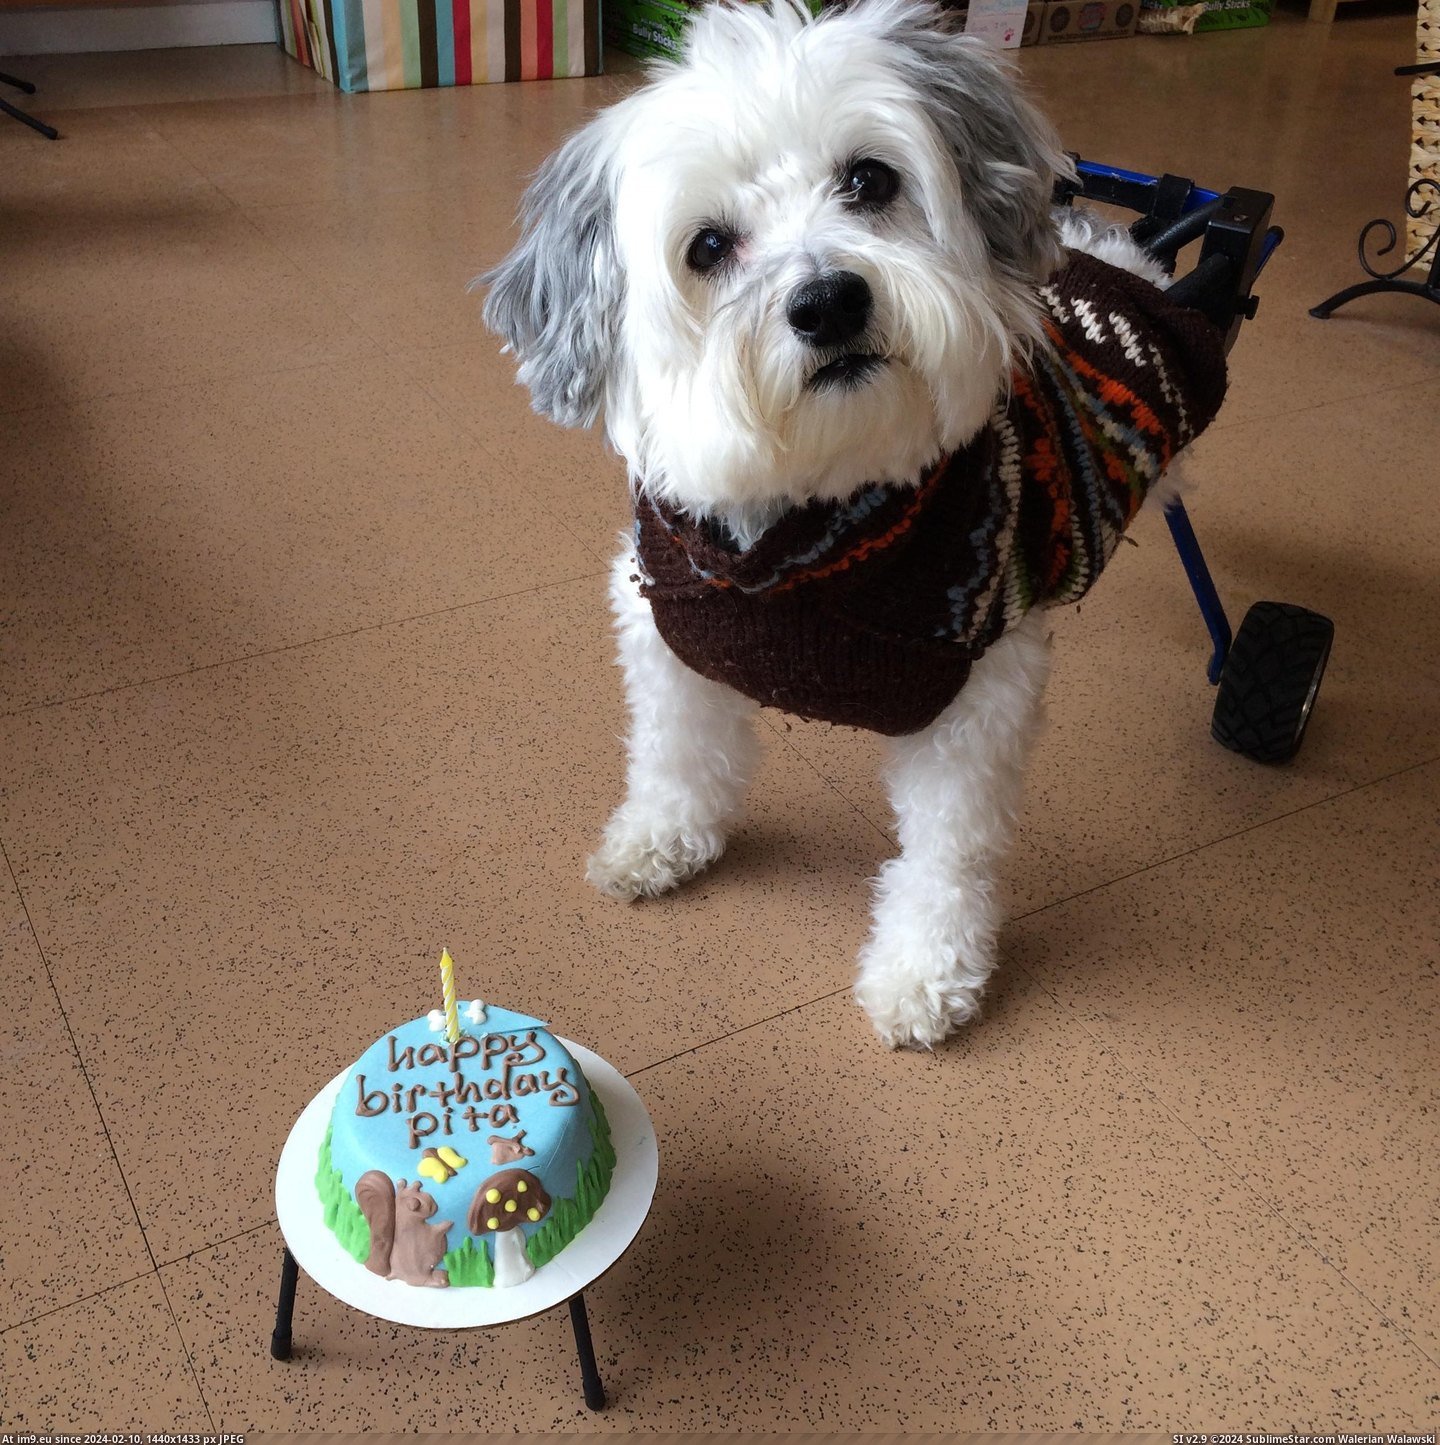 [Aww] Pita turned 11 today and he has been using his wheels for 10 years now (in My r/AWW favs)